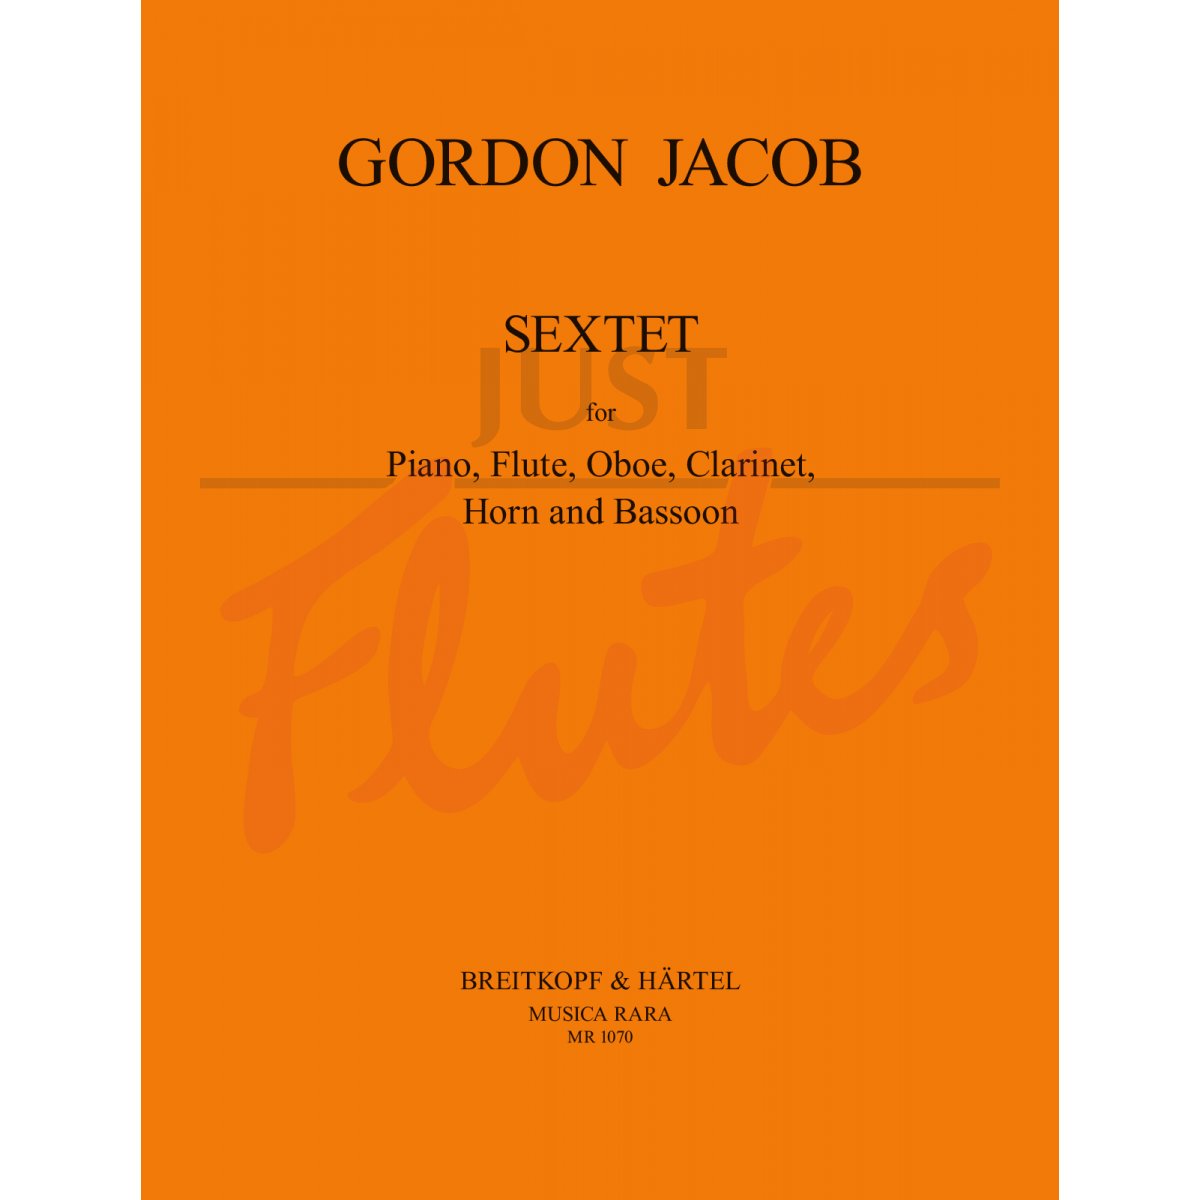 Sextet for Piano, Flute, Oboe, Clarinet, Horn and Bassoon